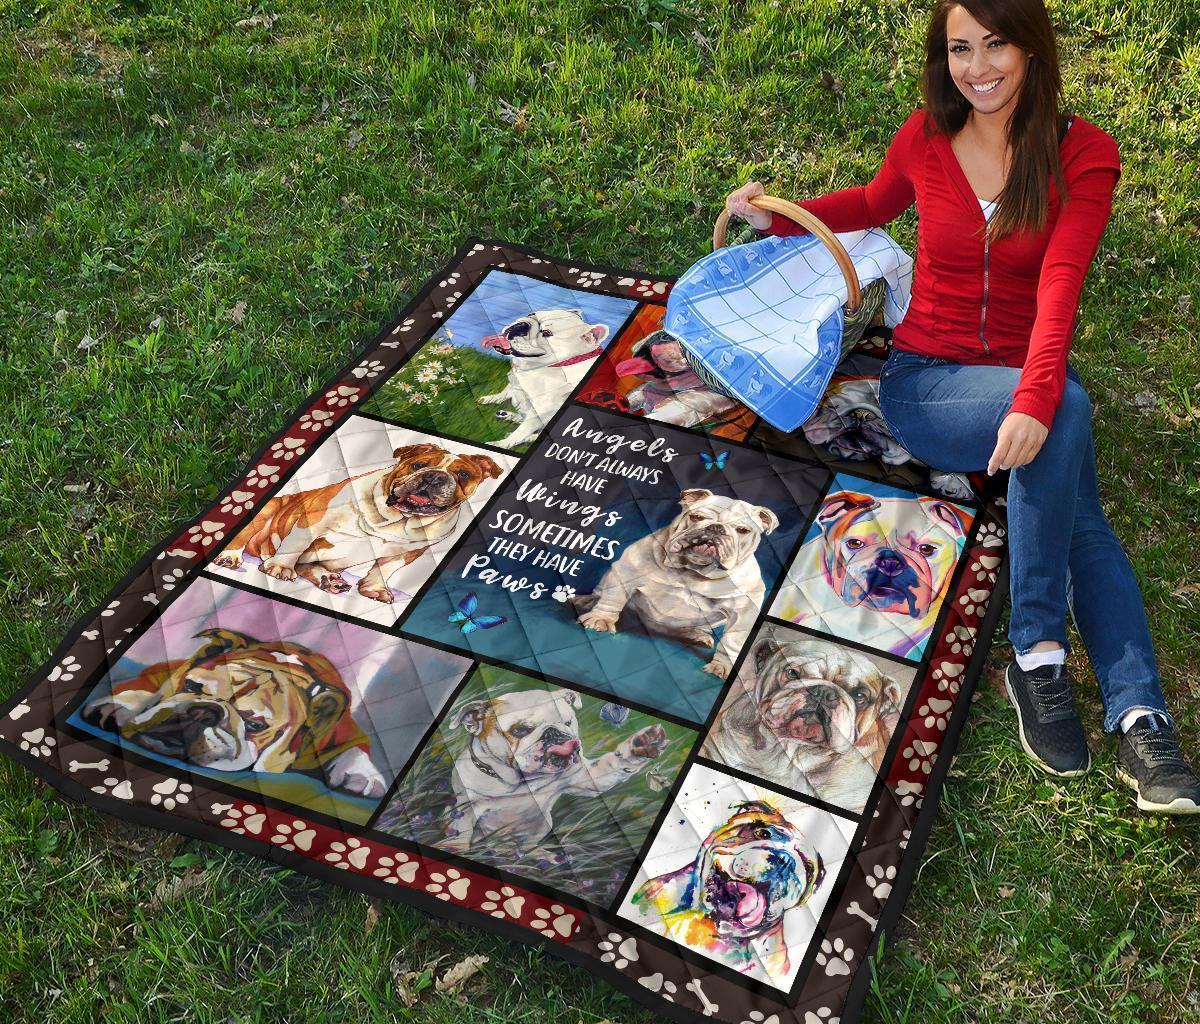 Bulldog Dog Quilt Blanket Angels Sometimes Have Paws-Gear Wanta